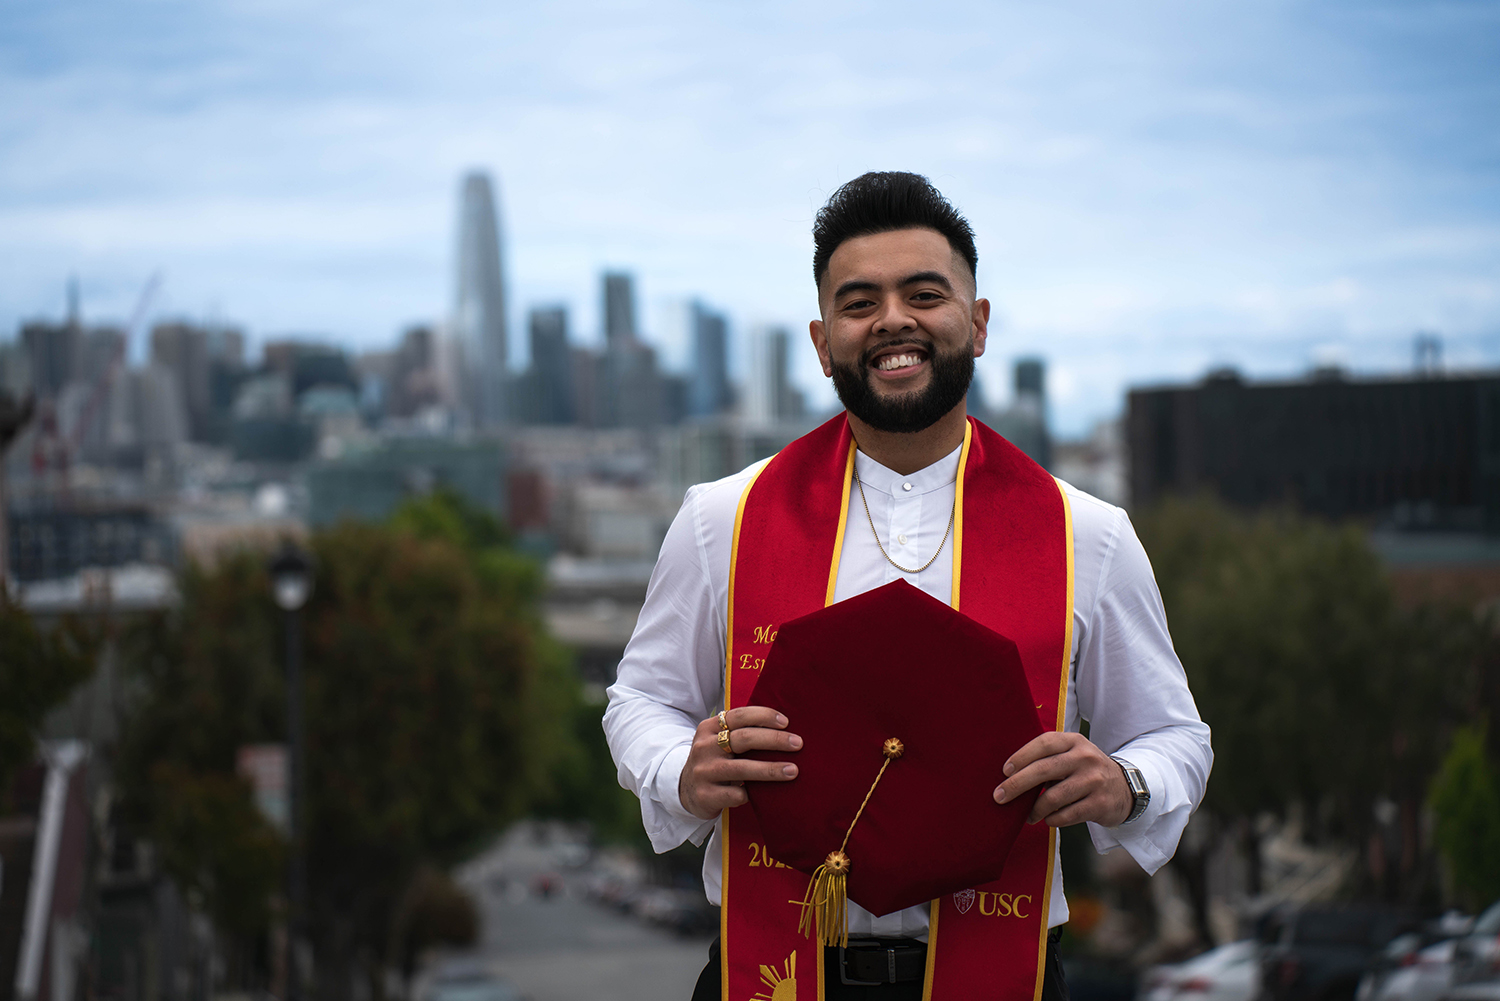 Matt Espanol in Commencement regalia with the city of San Francisco behind him